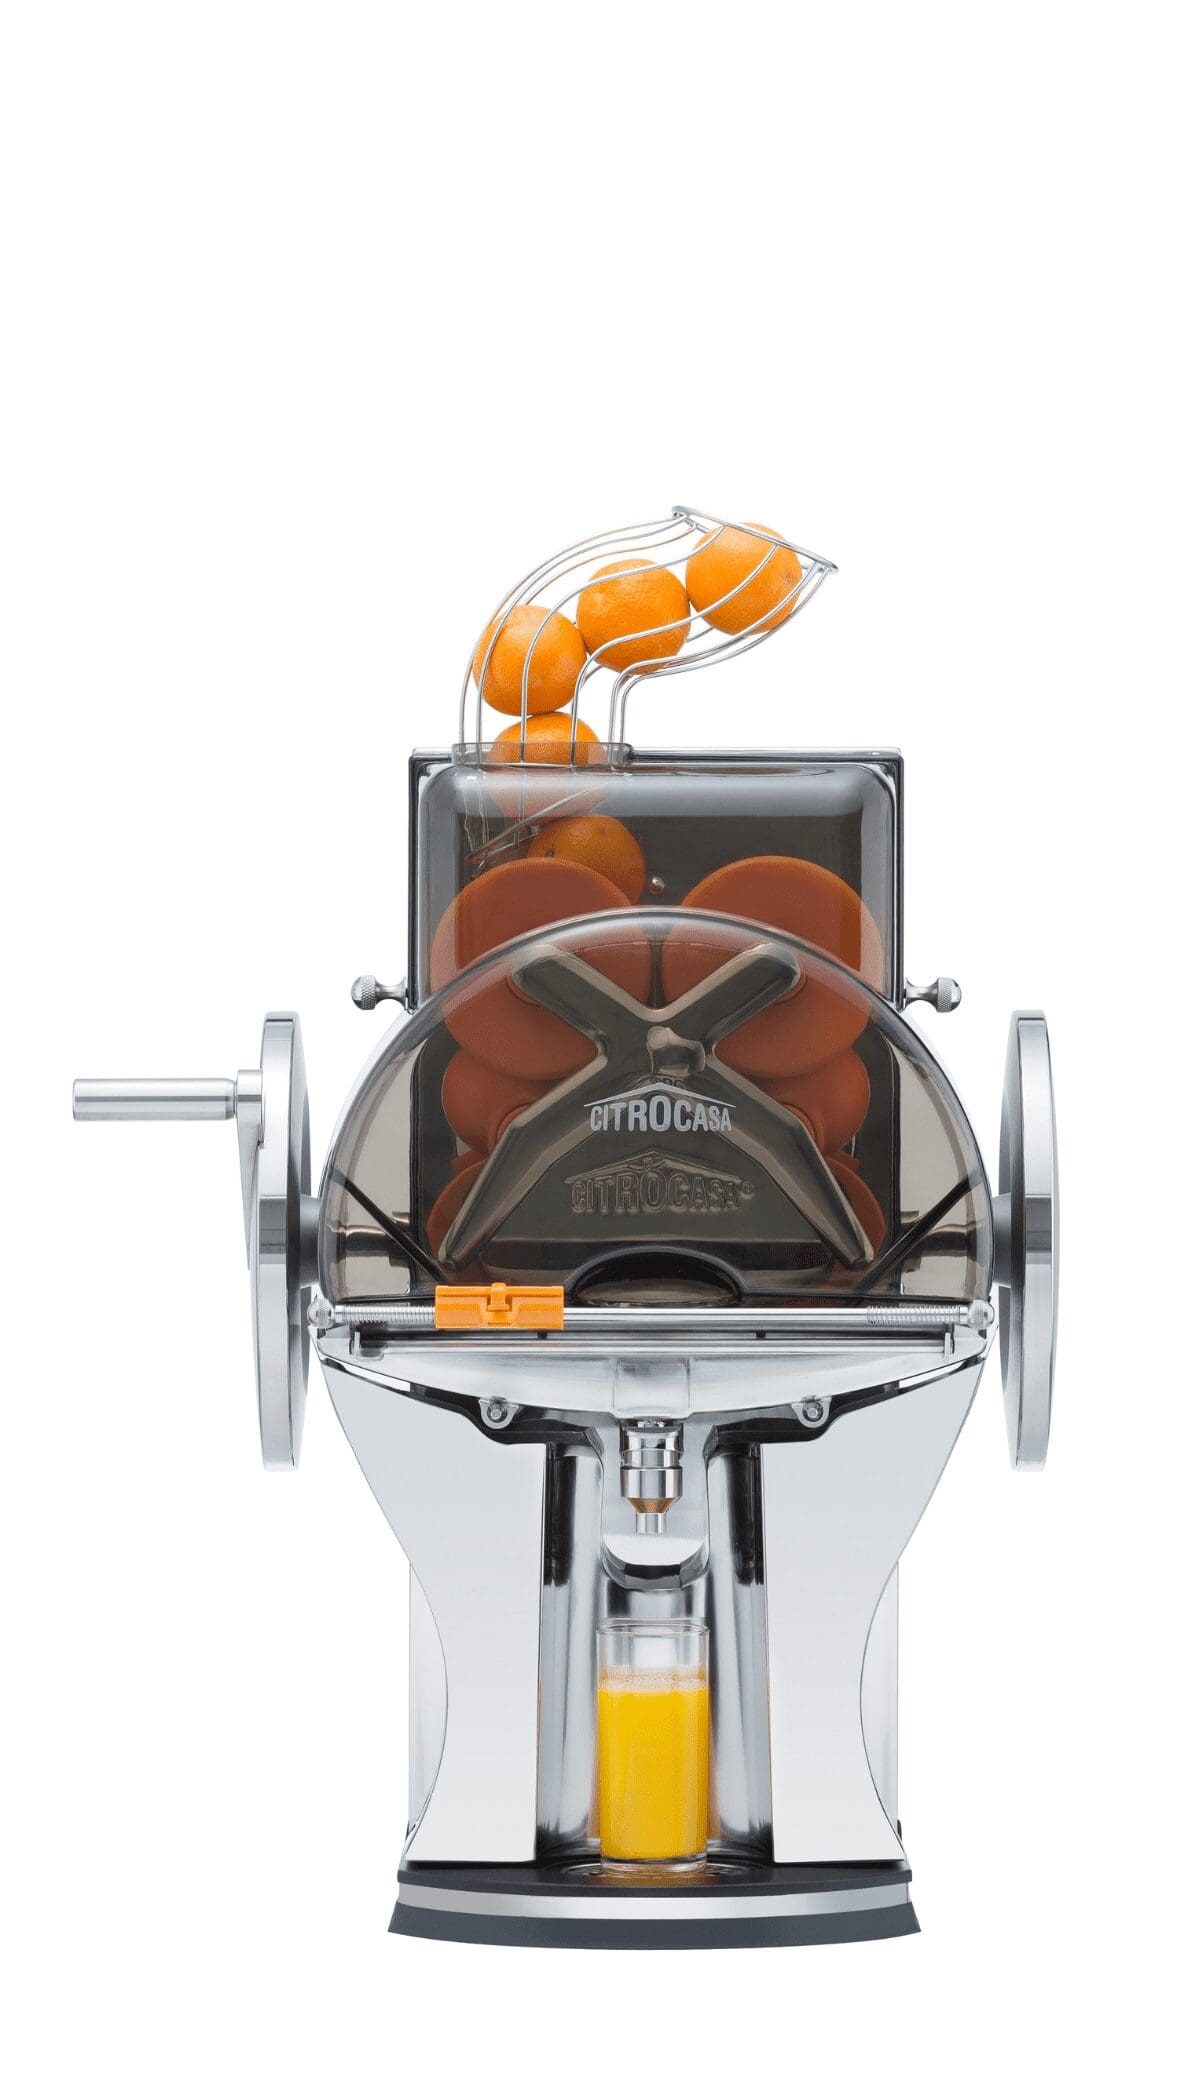 A Citrus America commercial juicer with oranges stacked on top, ready for squeezing. The transparent compartment showcases citrus being processed, and freshly squeezed juice is being collected at the bottom. The machine boasts a sleek metallic and transparent design.